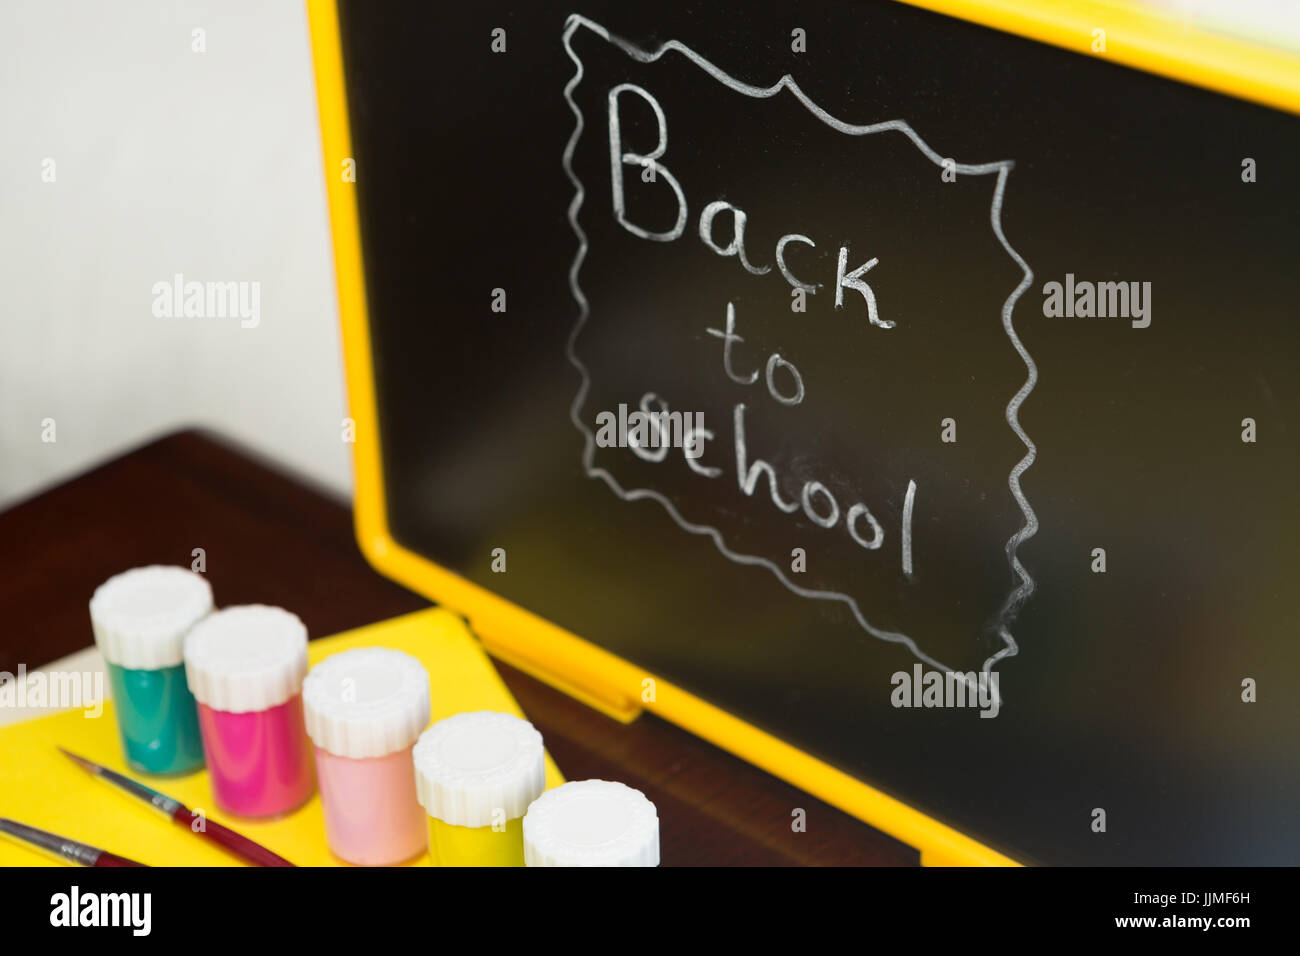 Back to School Writing on the Chalkboard Stock Photo